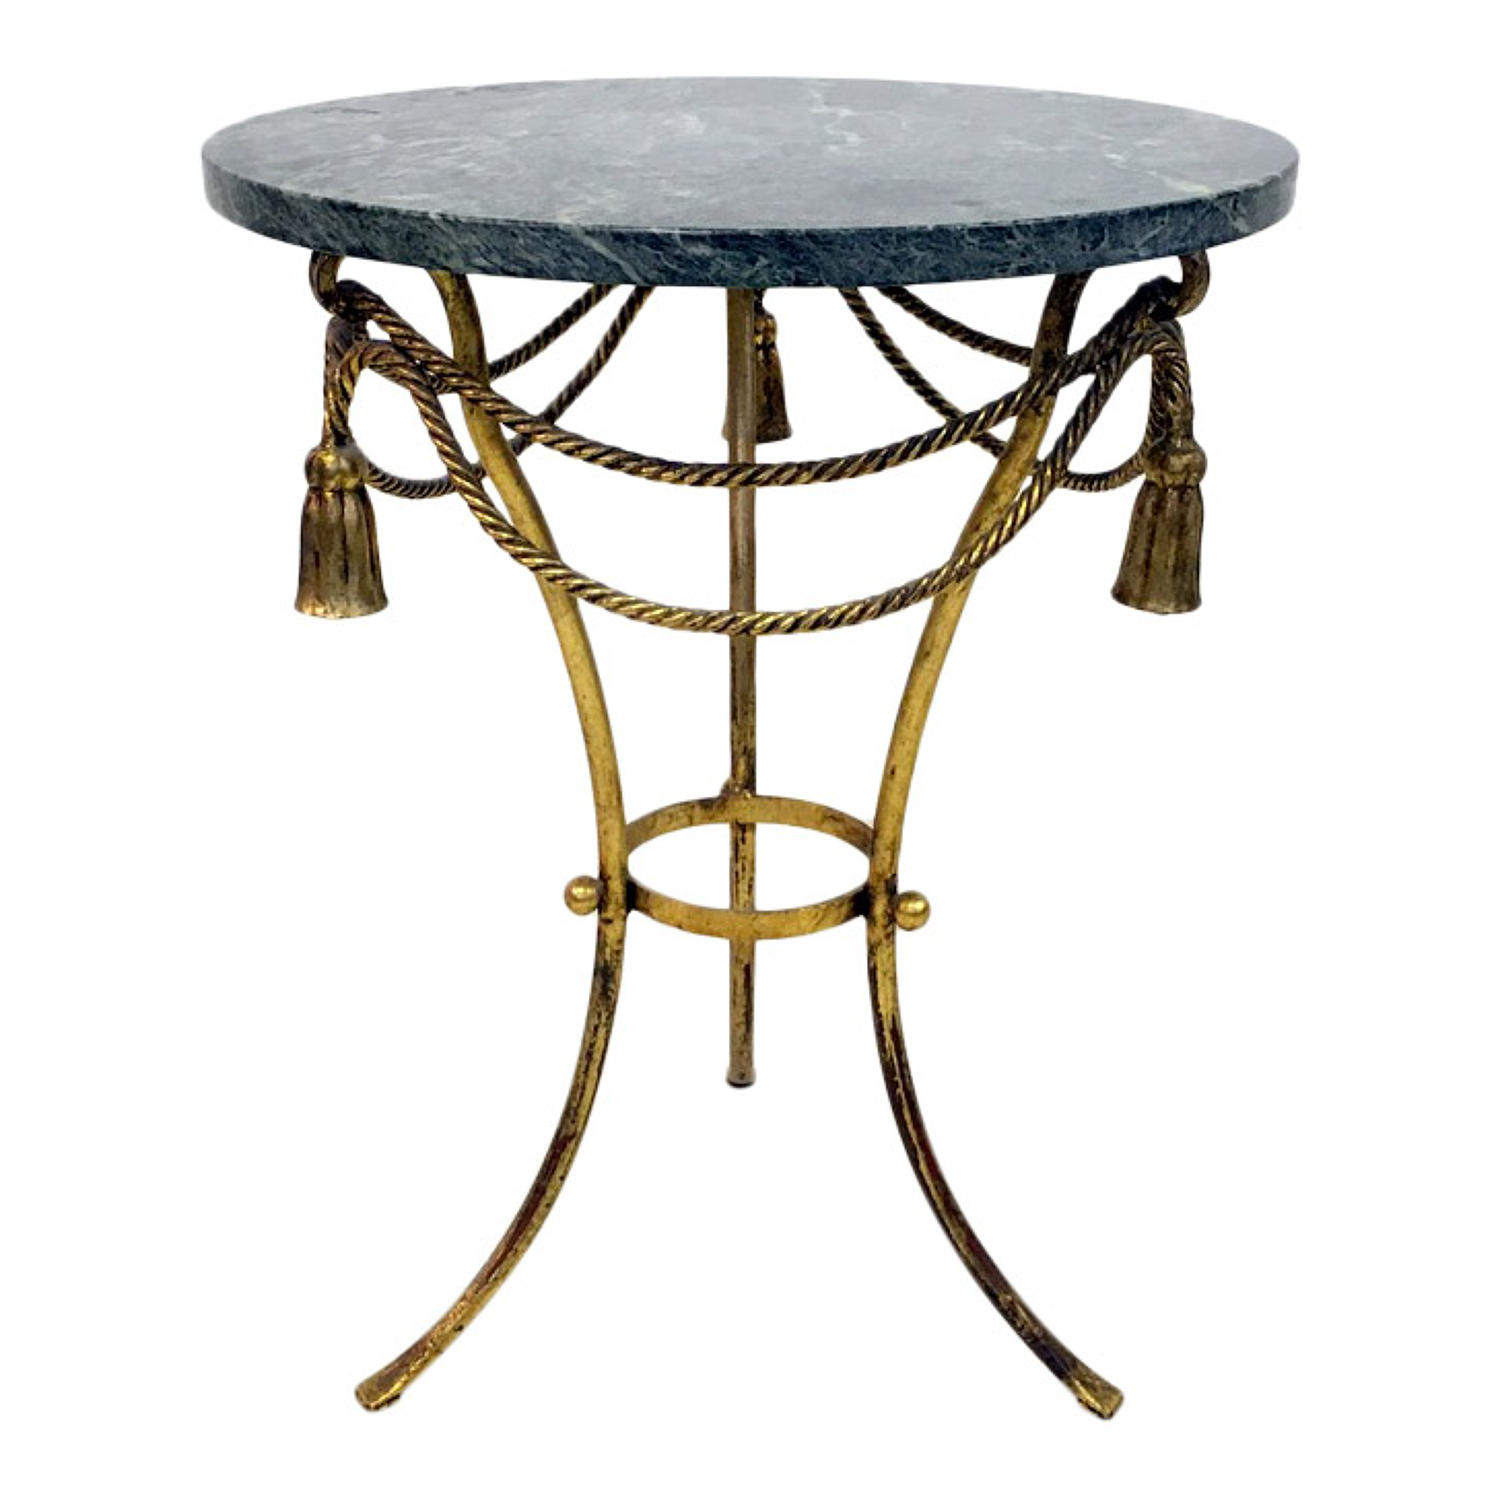 Italian gilt tassel and rope table with marble top